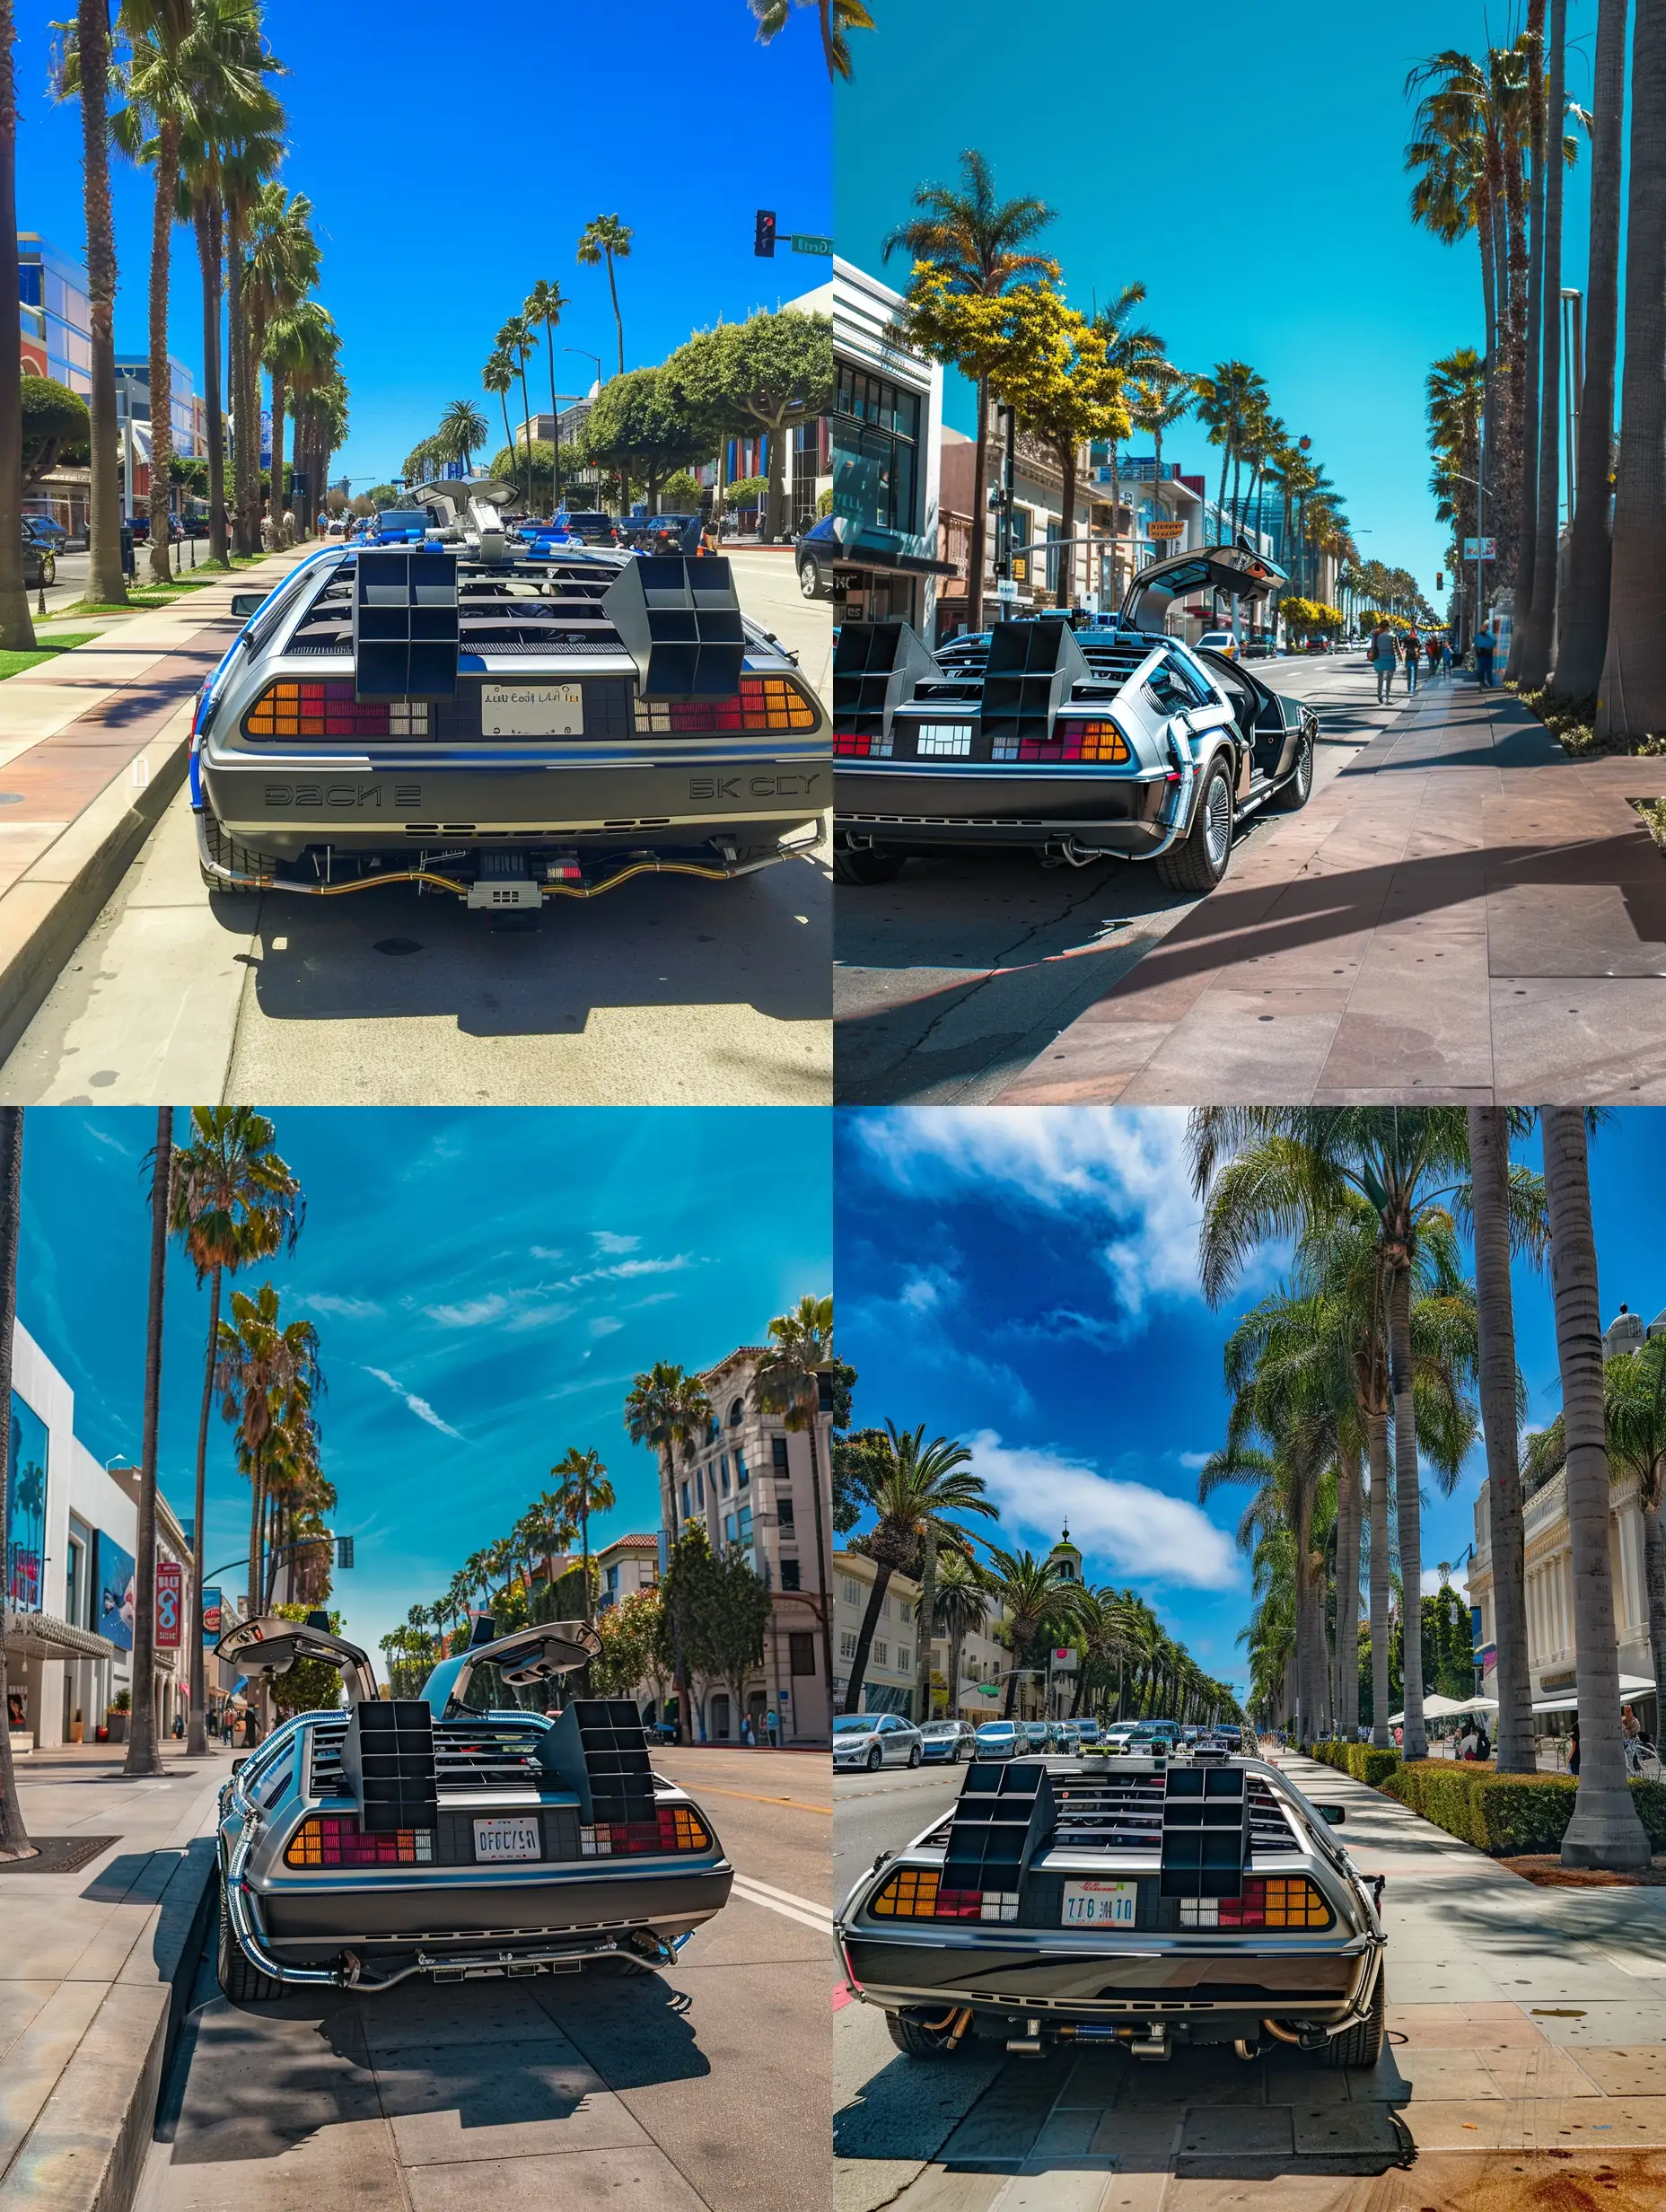 Back to the Future delorean along sidewalk on Rodeo Drive. Blue sky, vibrant, artistic, palm trees